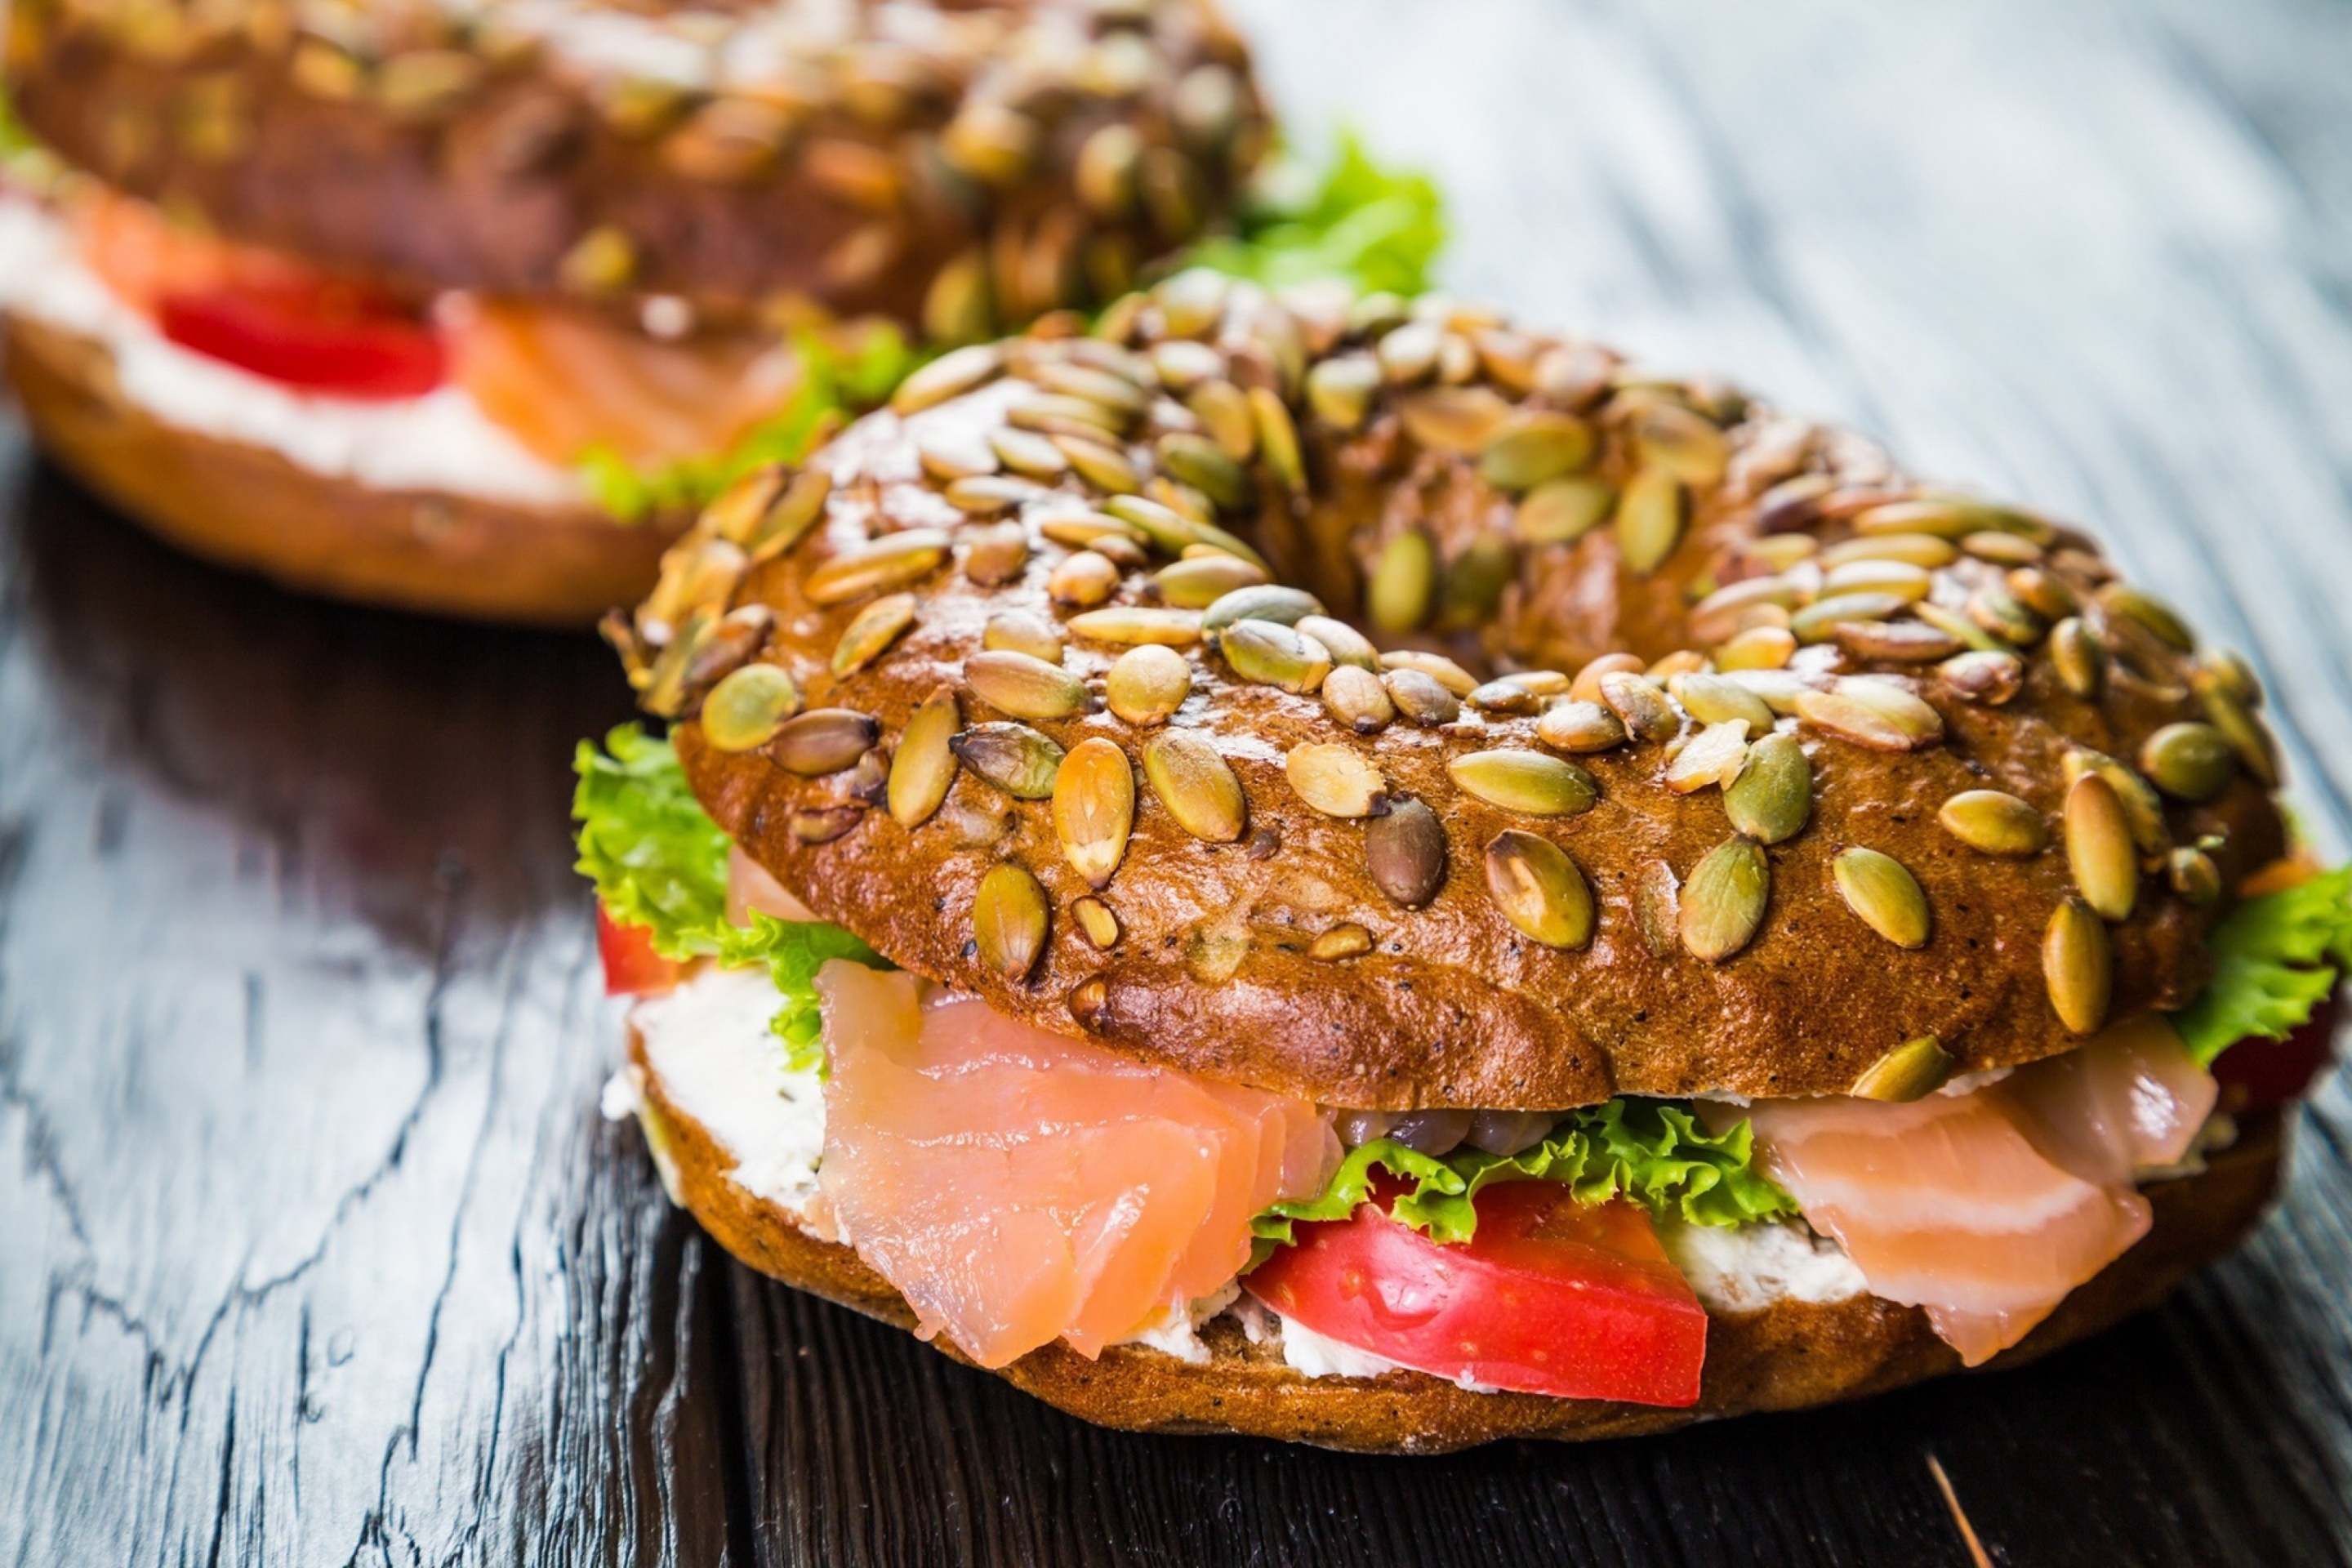 Bagel with Salmon wallpaper 2880x1920